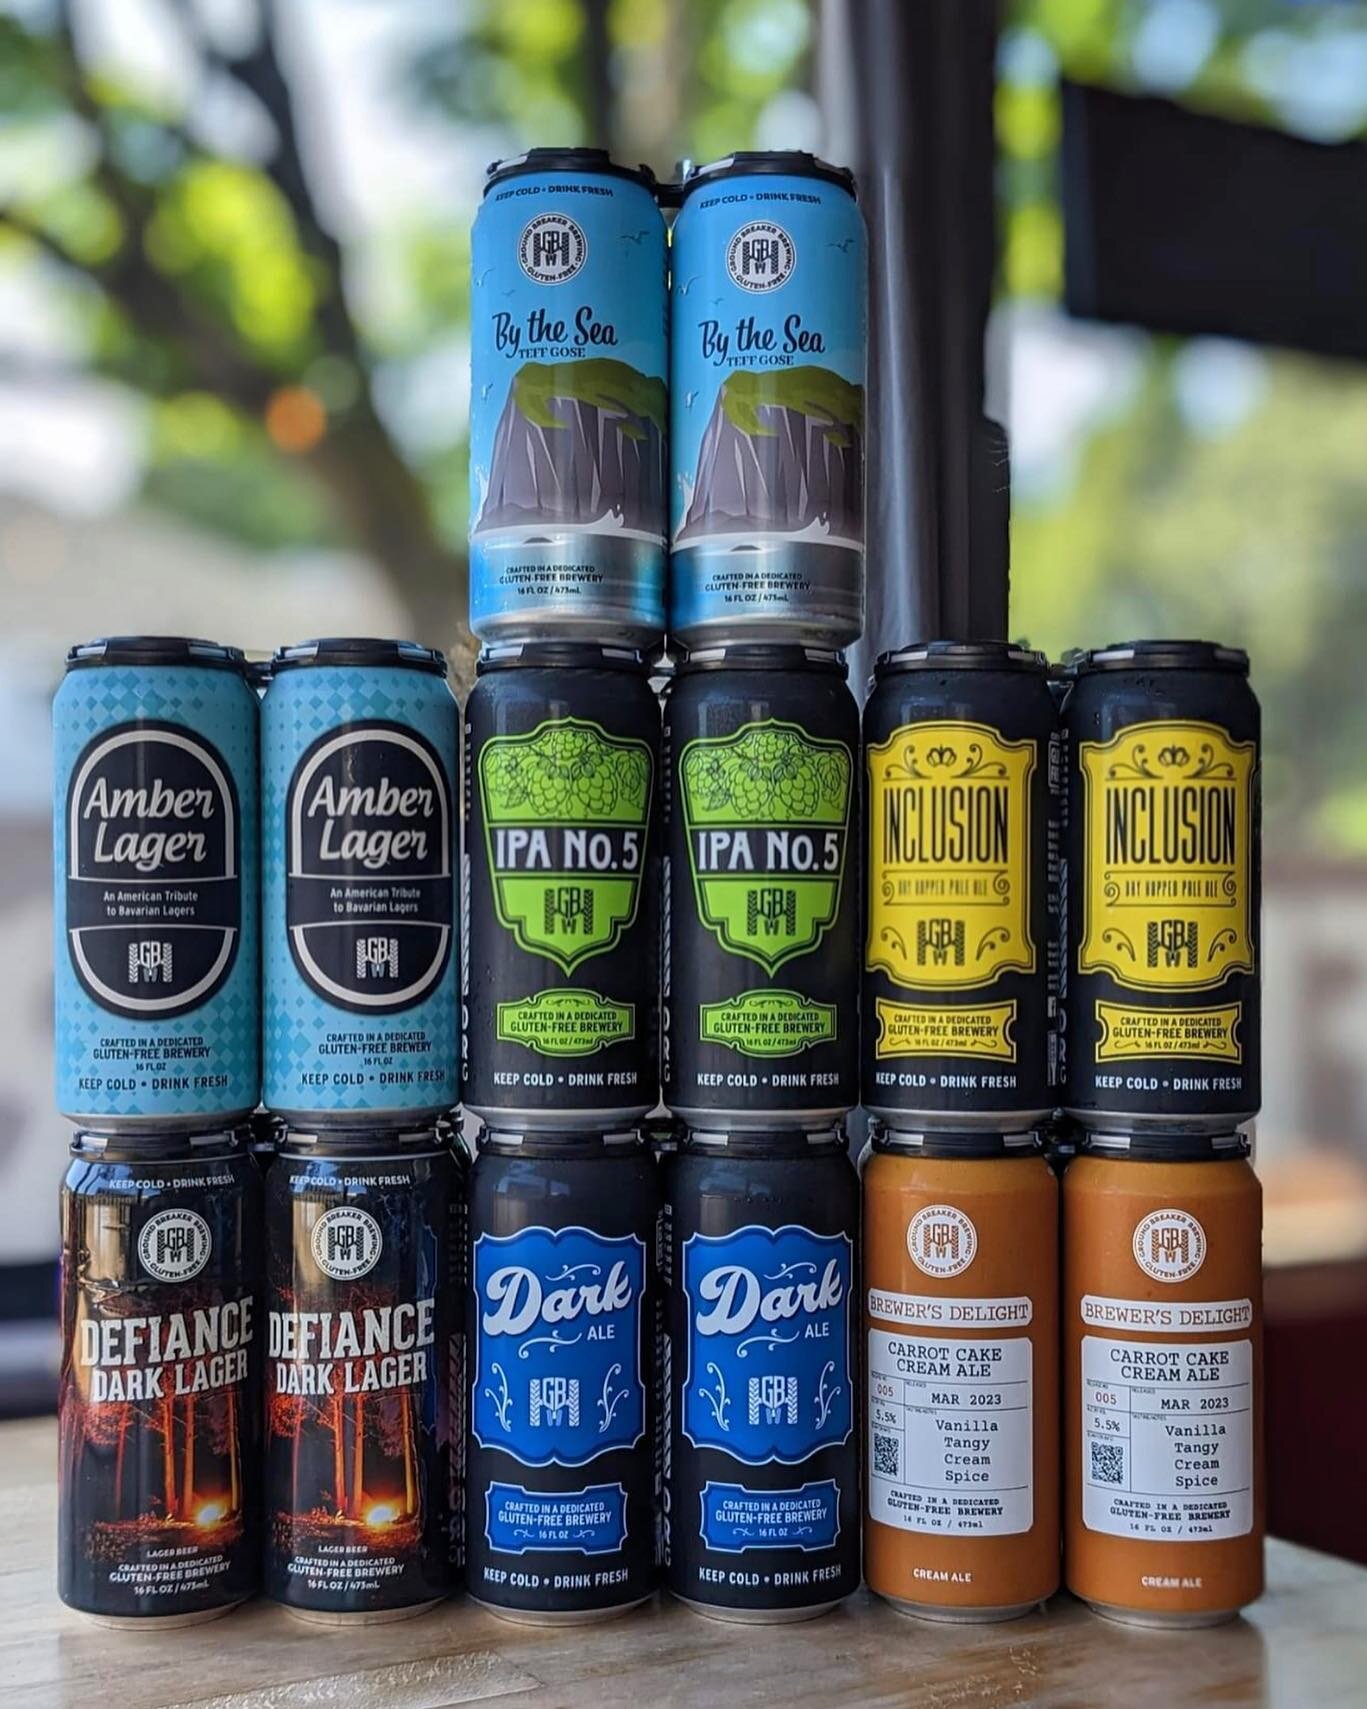 We have one more American Craft Beer Week special for you. Hang onto your hats, this one is going to rock your world! Grab a 16oz 4-pack in the pub and mention American Craft Beer Week for a $4 a pack discount! That's right, all you have to do is tel